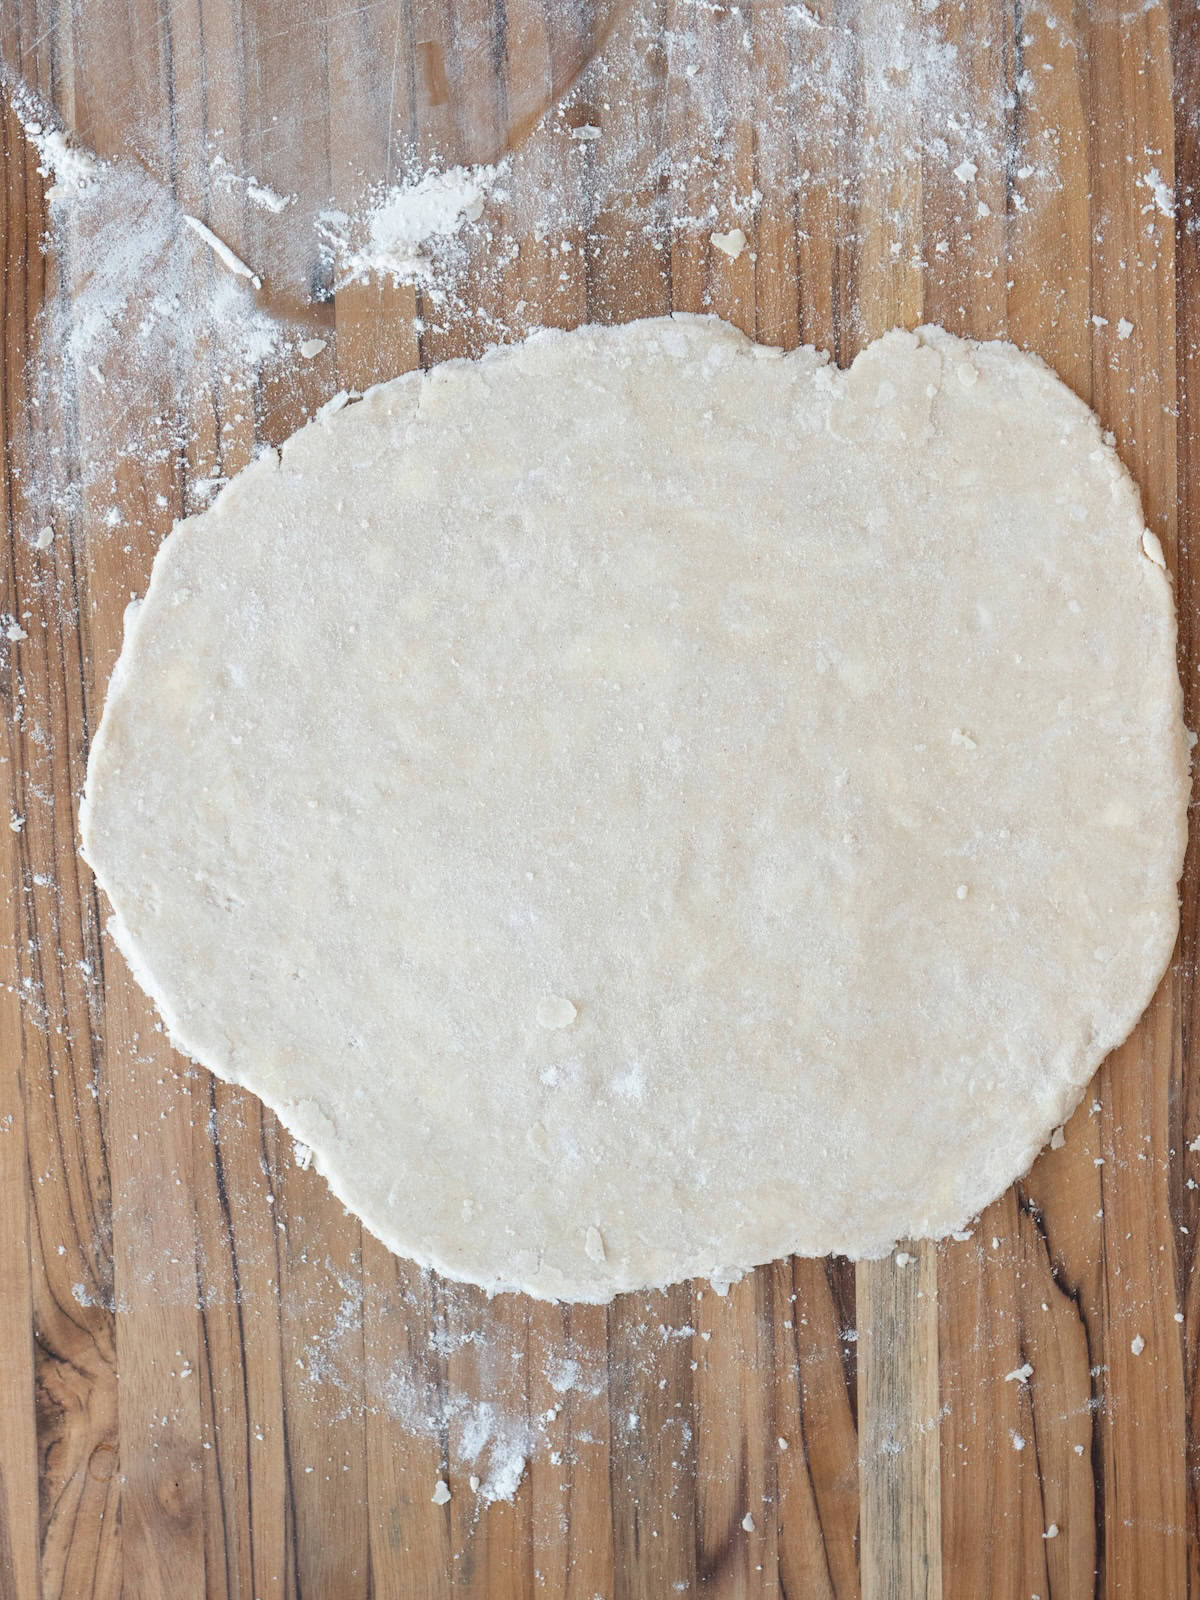 Pie dough rolled out into a large circle.